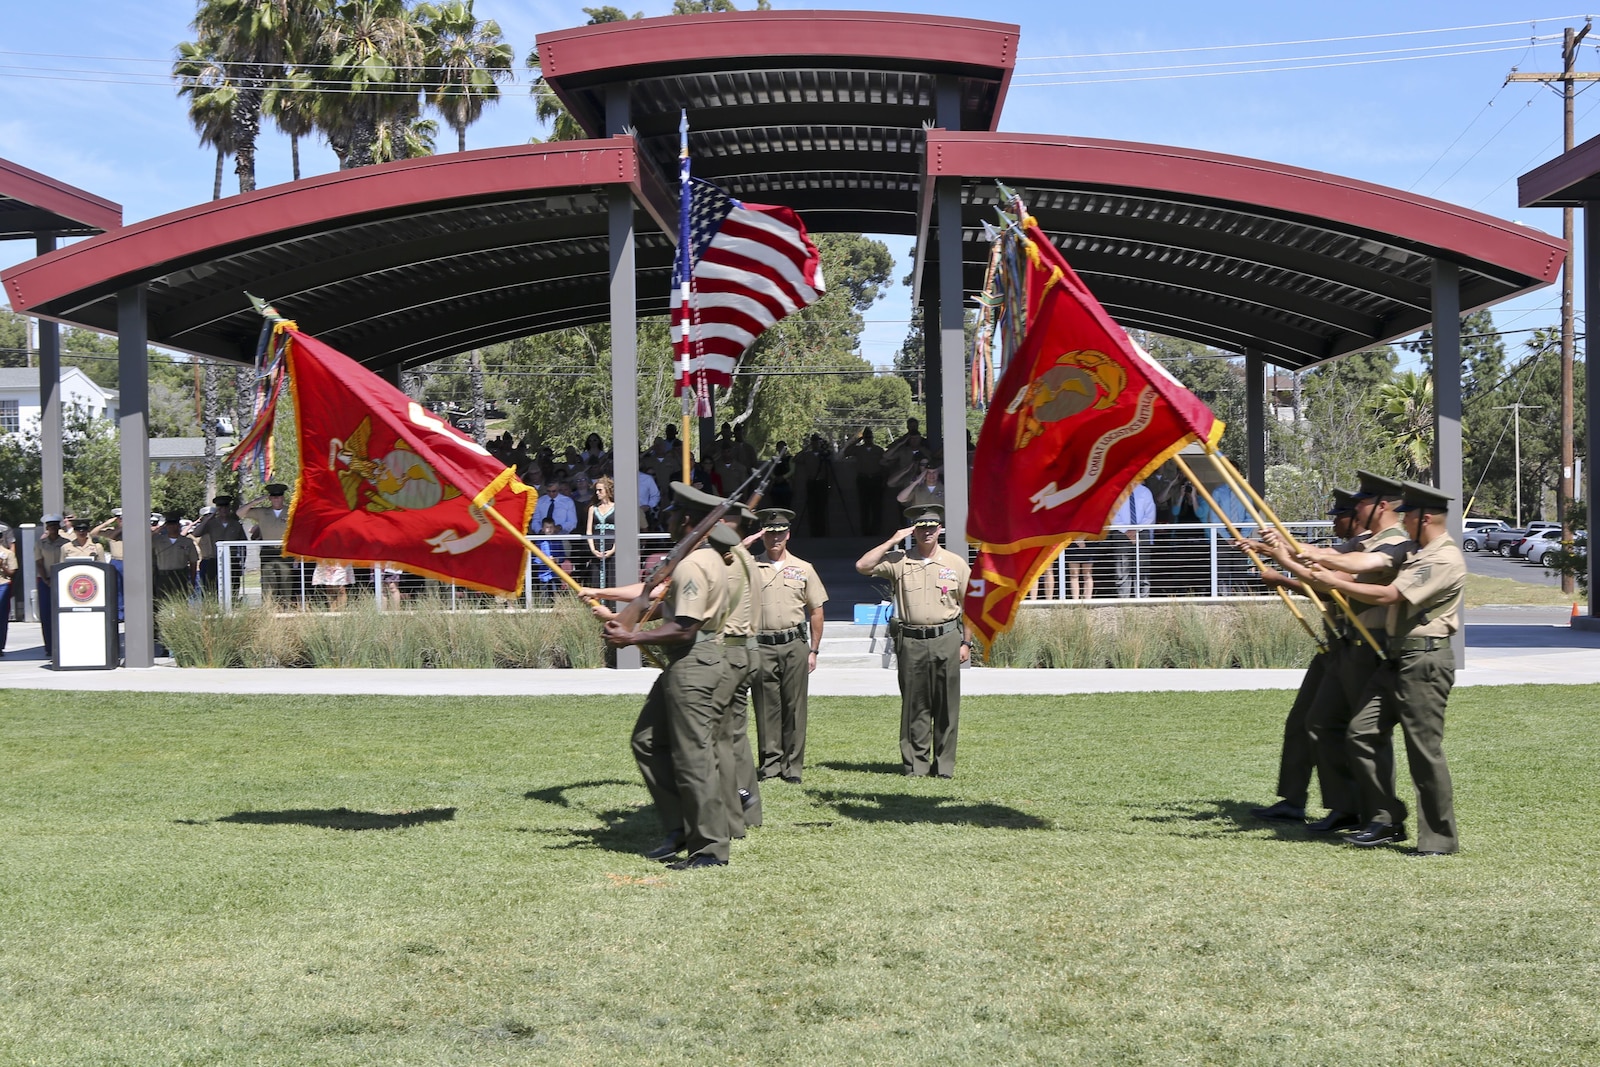 U.S. Marine Corps Col. Eric B. Kraft, off going commanding officer, Headquarters Regiment, 1st Marine Logistics Group, 1 Marine Expeditionary Force, and on coming commanding officer, Col. Phillip N. Frietze salute the colors during the Change of Command Ceremony for Headquarters Regiment aboard Camp Pendleton Calif., May 1, 2015. The Change of Command Ceremony for Headquarters Regiment showcased the passing of command from Col. Eric B. Kraft to Col. Phillip N. Frietze. (U.S. Marine Corps photo by Lance Cpl. Lauren Falk/Released)